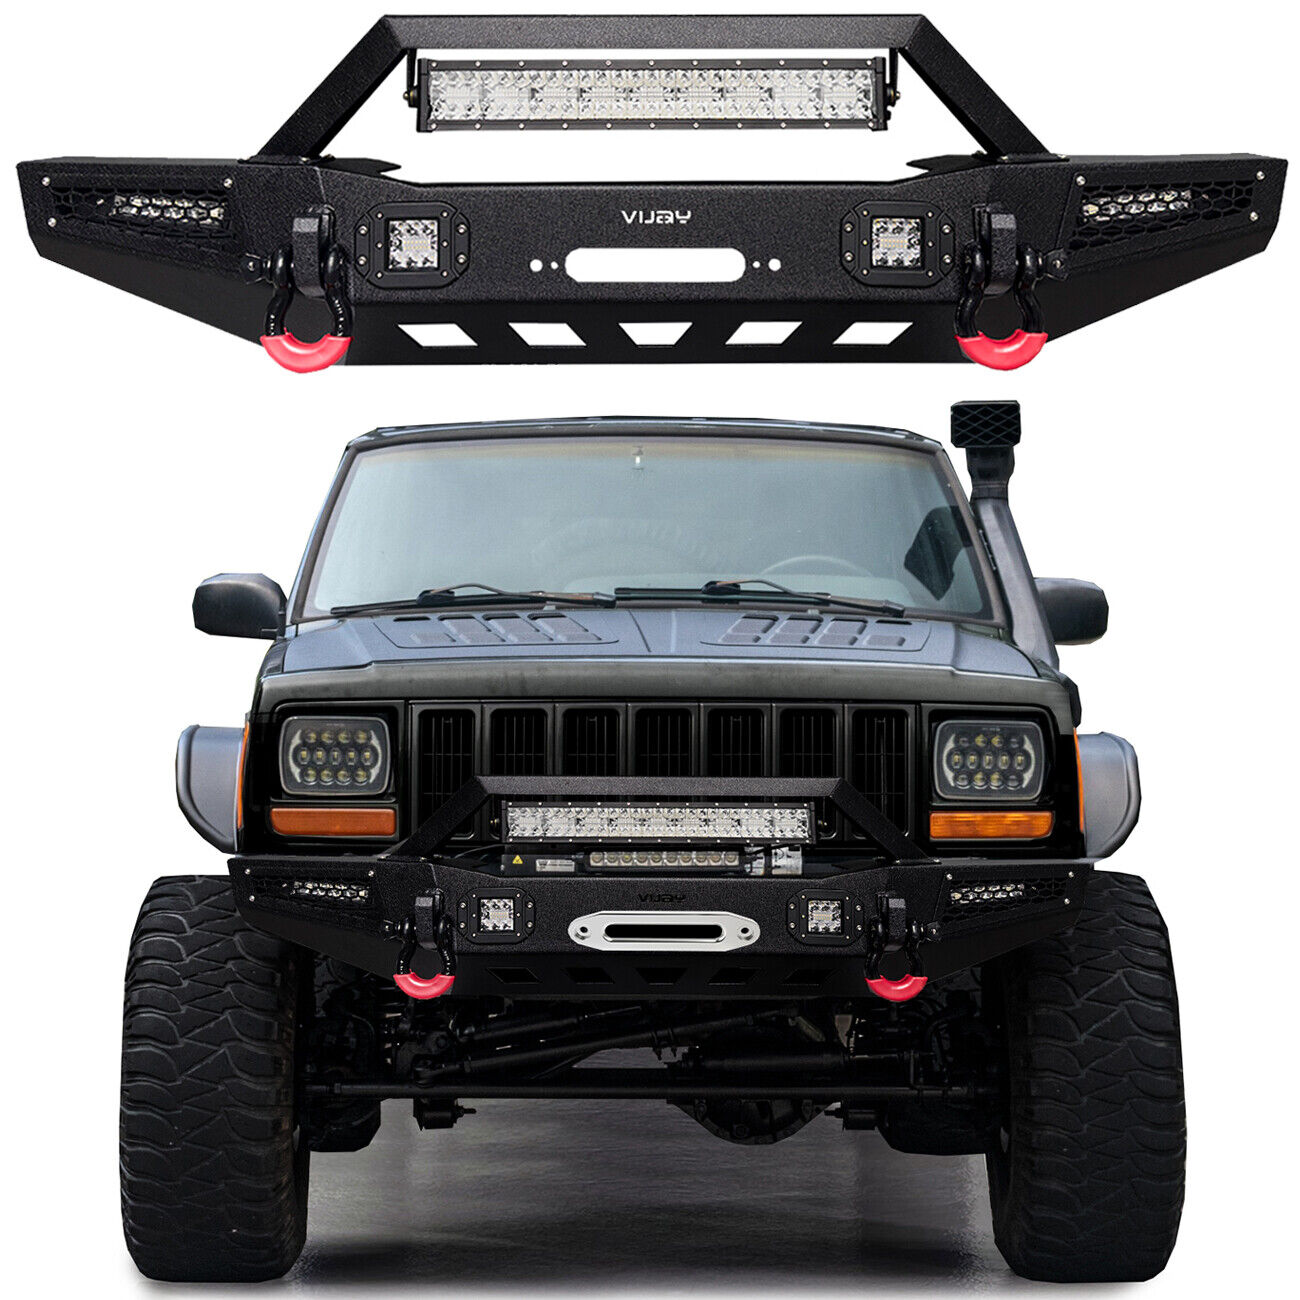 Vijay For 1984-2001 Cherokee XJ Front or Rear Bumper with Tire Carrier and Light